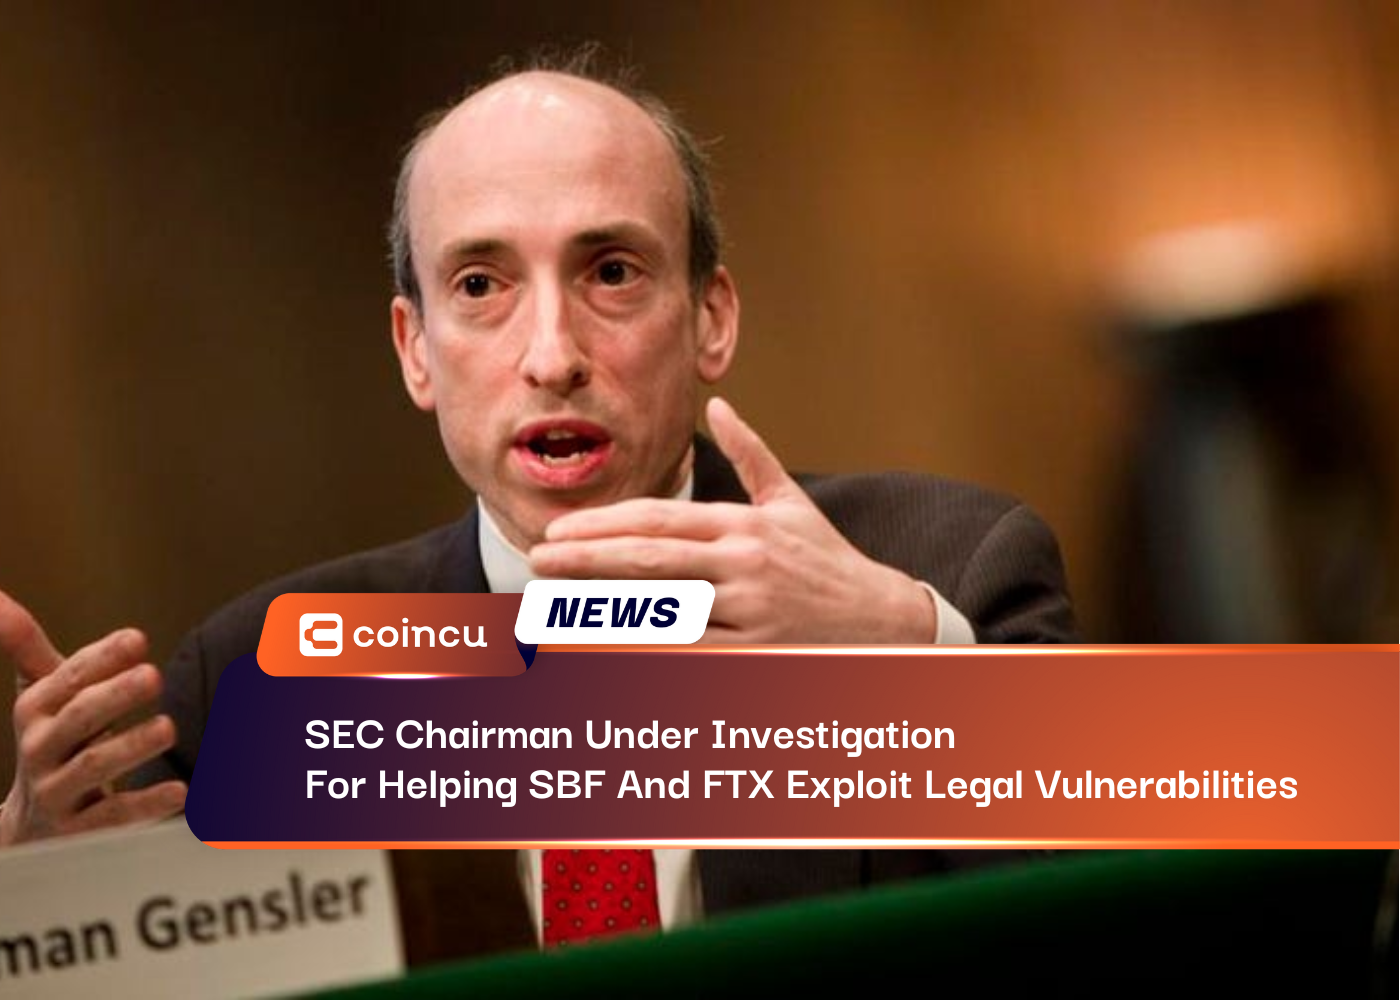 SEC Chairman Under Investigation For Helping SBF And FTX Exploit Legal Vulnerabilities